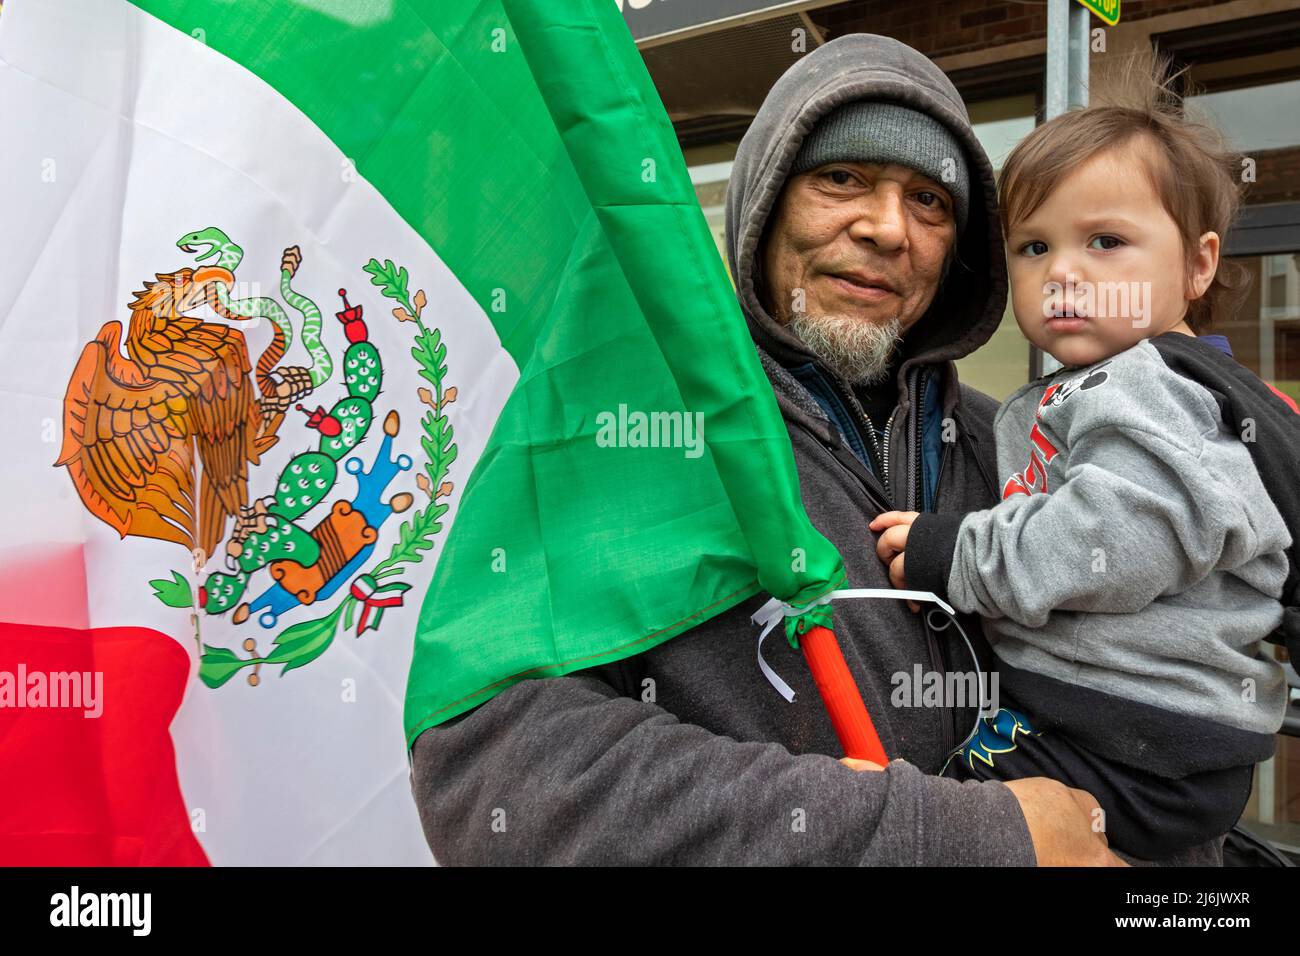 Detroit, Michigan USA - 1 May 2022 - A man and a small child watch the Cinco de Mayo parade in Detroit's Mexican-American neighborhood. Thousands lined the street for the annual parade, which returned in 2022 after a two-year hiatus due to the pandemic. Cinco de Mayo celebrates a Mexican victory over the French on May 5, 1862. Credit: Jim West/Alamy Live News Stock Photo